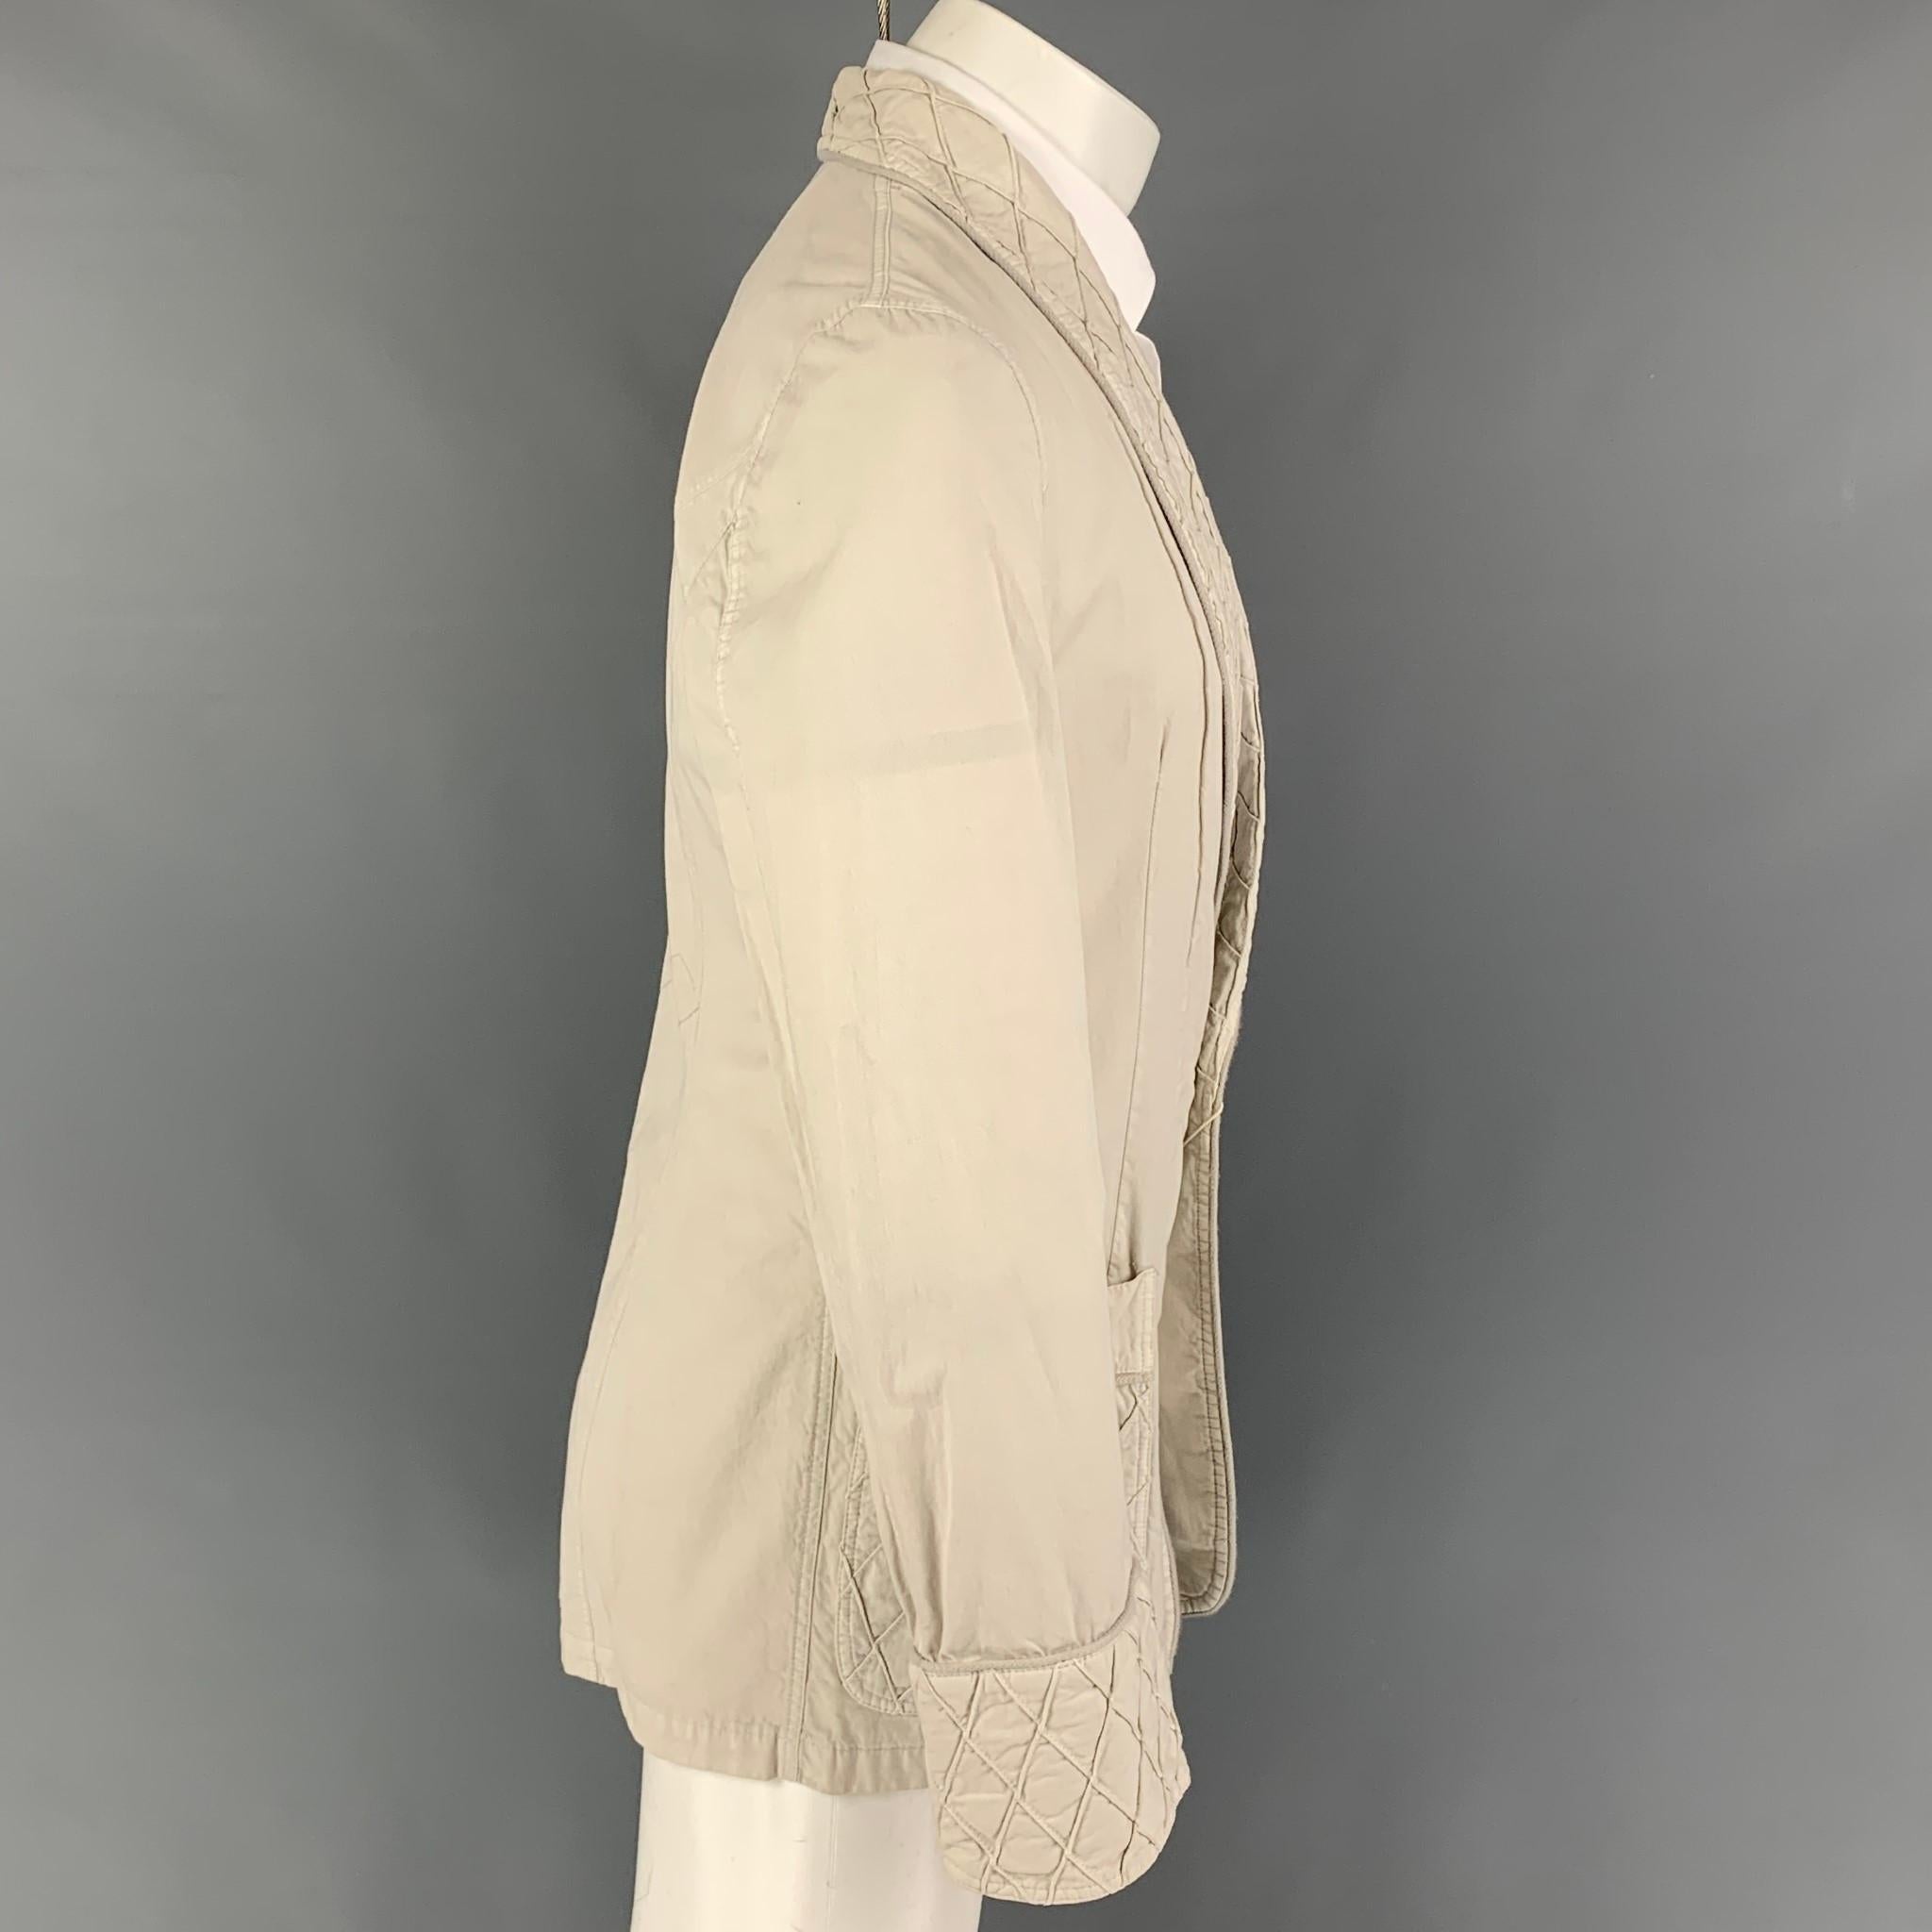 VIKTOR & ROLF jacket comes in a off white cotton featuring a shawl collar, top stitching, patch pockets, and a single button closure.

New with tags.
Marked: 46

Measurements:

Shoulder: 17.5 in.
Chest: 38 in.
Sleeve: 26 in.
Length: 29 in.